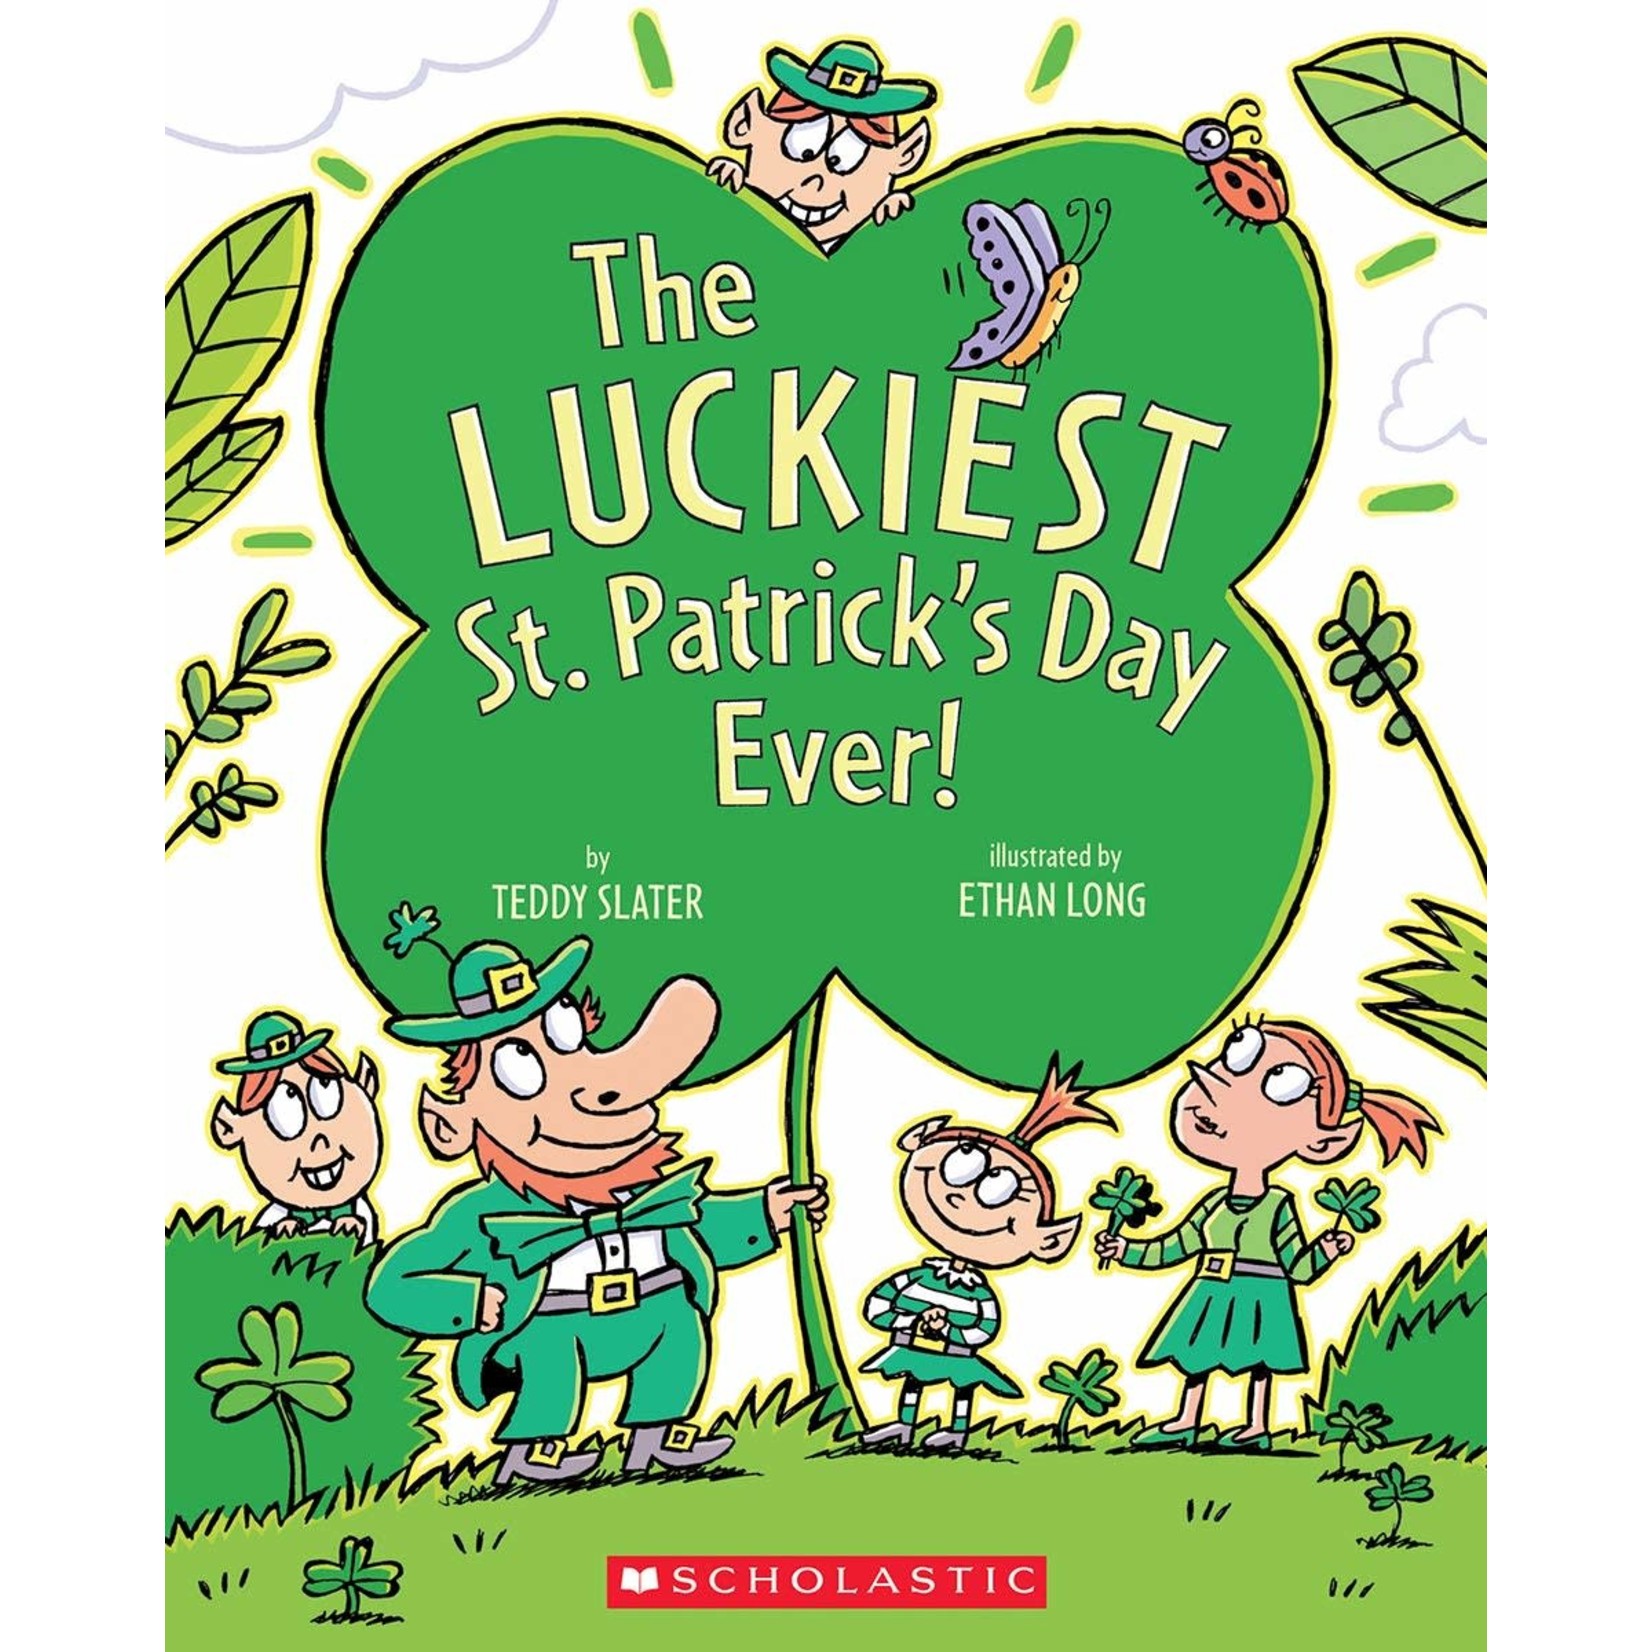 St. Patrick's Day Pack (2 Books Included The Luckiest Leprechaun & Fin M'Coul)